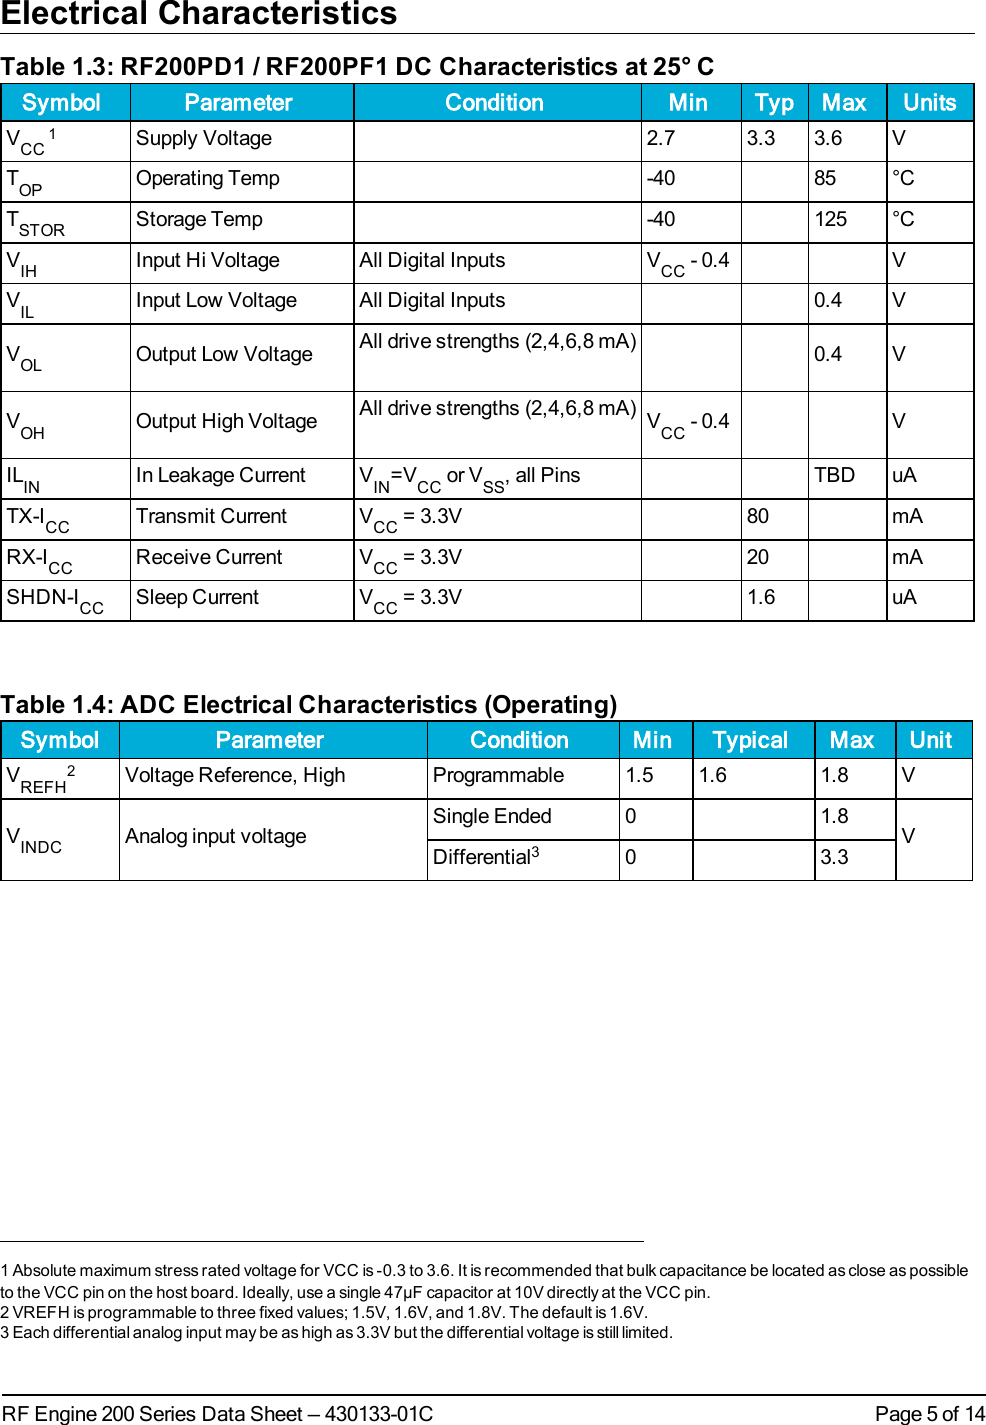 Page 5 of 14RF Engine 200 Series Data Sheet — 430133-01CElectrical CharacteristicsSymbol Parameter Condition Min Typ Max UnitsVCC1Supply Voltage 2.7 3.3 3.6 VTOP Operating Temp -40 85 °CTSTOR Storage Temp -40 125 °CVIH Input Hi Voltage All Digital Inputs VCC - 0.4 VVIL Input Low Voltage All Digital Inputs 0.4 VVOL Output Low Voltage All drive strengths (2,4,6,8 mA) 0.4 VVOH Output High Voltage All drive strengths (2,4,6,8 mA) VCC - 0.4 VILIN In Leakage Current VIN=VCC or VSS, all Pins TBD uATX-ICC Transmit Current VCC = 3.3V 80 mARX-ICC Receive Current VCC = 3.3V 20 mASHDN-ICC Sleep Current VCC = 3.3V 1.6 uATable 1.3: RF200PD1 / RF200PF1 DC Characteristics at 25° CSymbol Parameter Condition Min Typical Max UnitVREFH2Voltage Reference, High Programmable 1.5 1.6 1.8 VVINDC Analog input voltageSingle Ended 0 1.8VDifferential30 3.3Table 1.4: ADC Electrical Characteristics (Operating)1 Absolute maximum stress rated voltage for VCC is -0.3 to 3.6. It is recommended that bulk capacitance be located as close as possibleto the VCC pin on the host board. Ideally, use a single 47µF capacitor at 10V directly at the VCC pin.2 VREFH is programmable to three fixed values; 1.5V, 1.6V, and 1.8V. The default is 1.6V.3 Each differential analog input may be as high as 3.3V but the differential voltage is still limited.